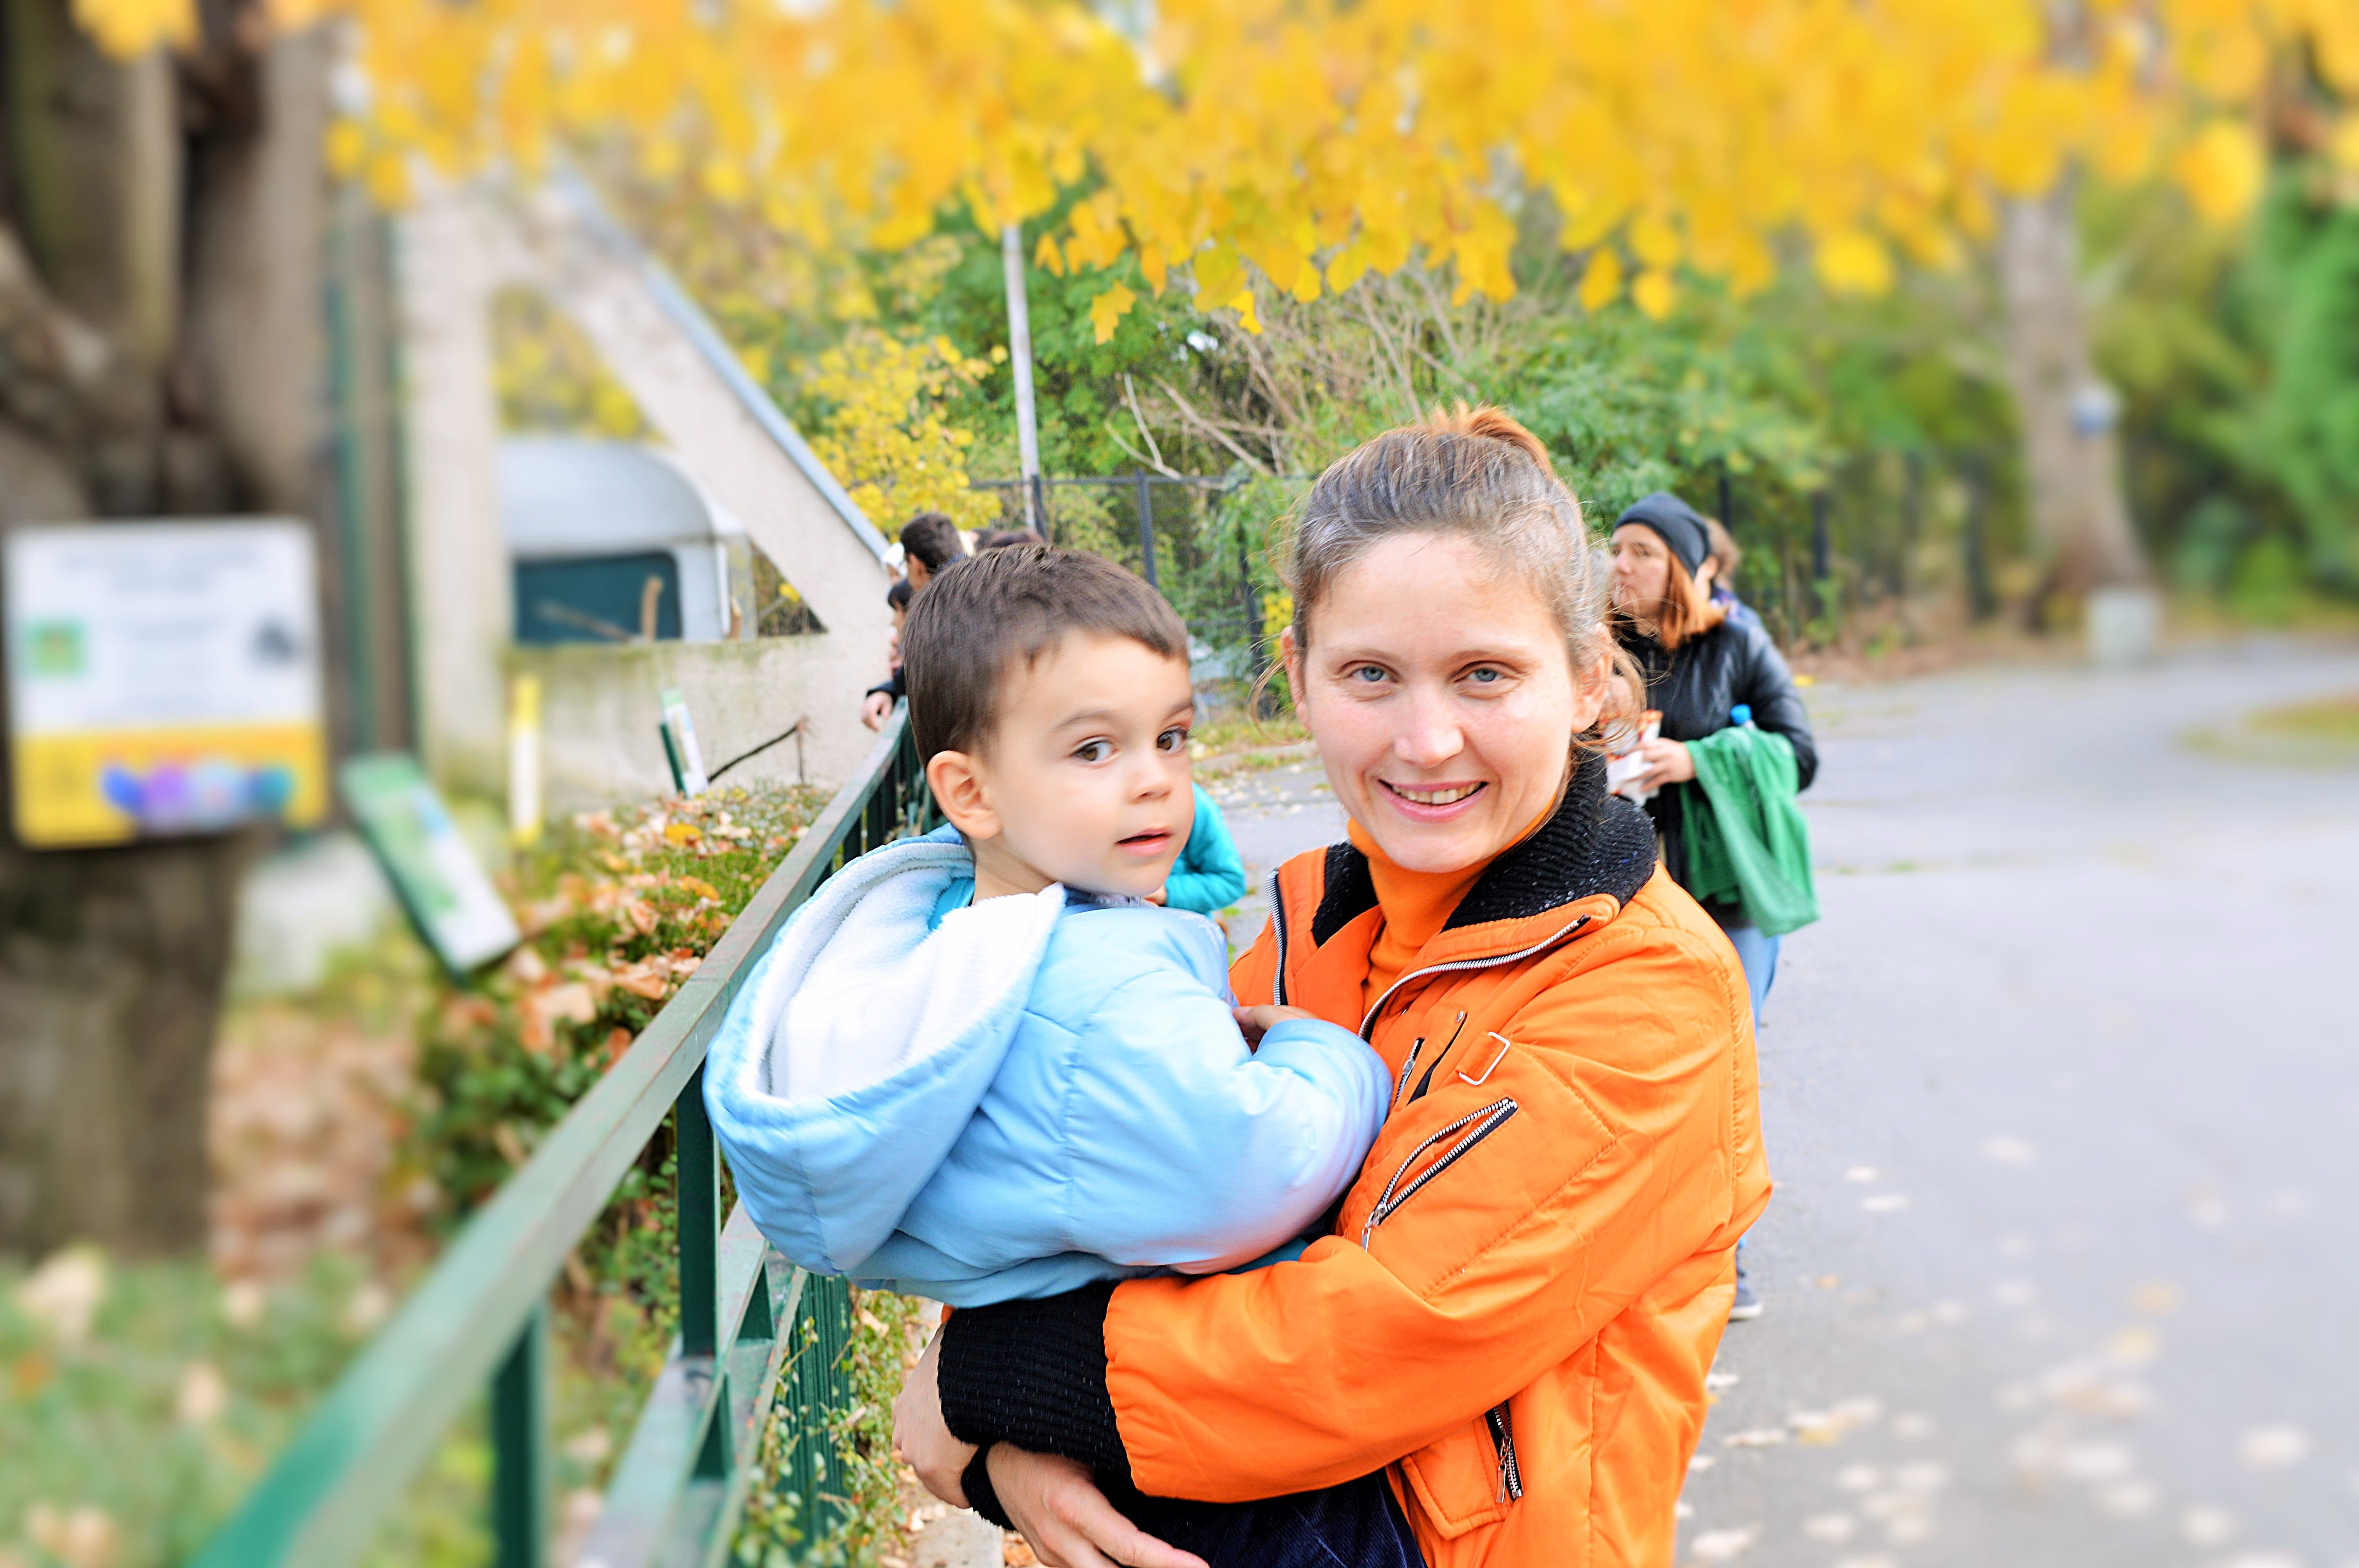 woman carrying his child in teal full zipped jacket